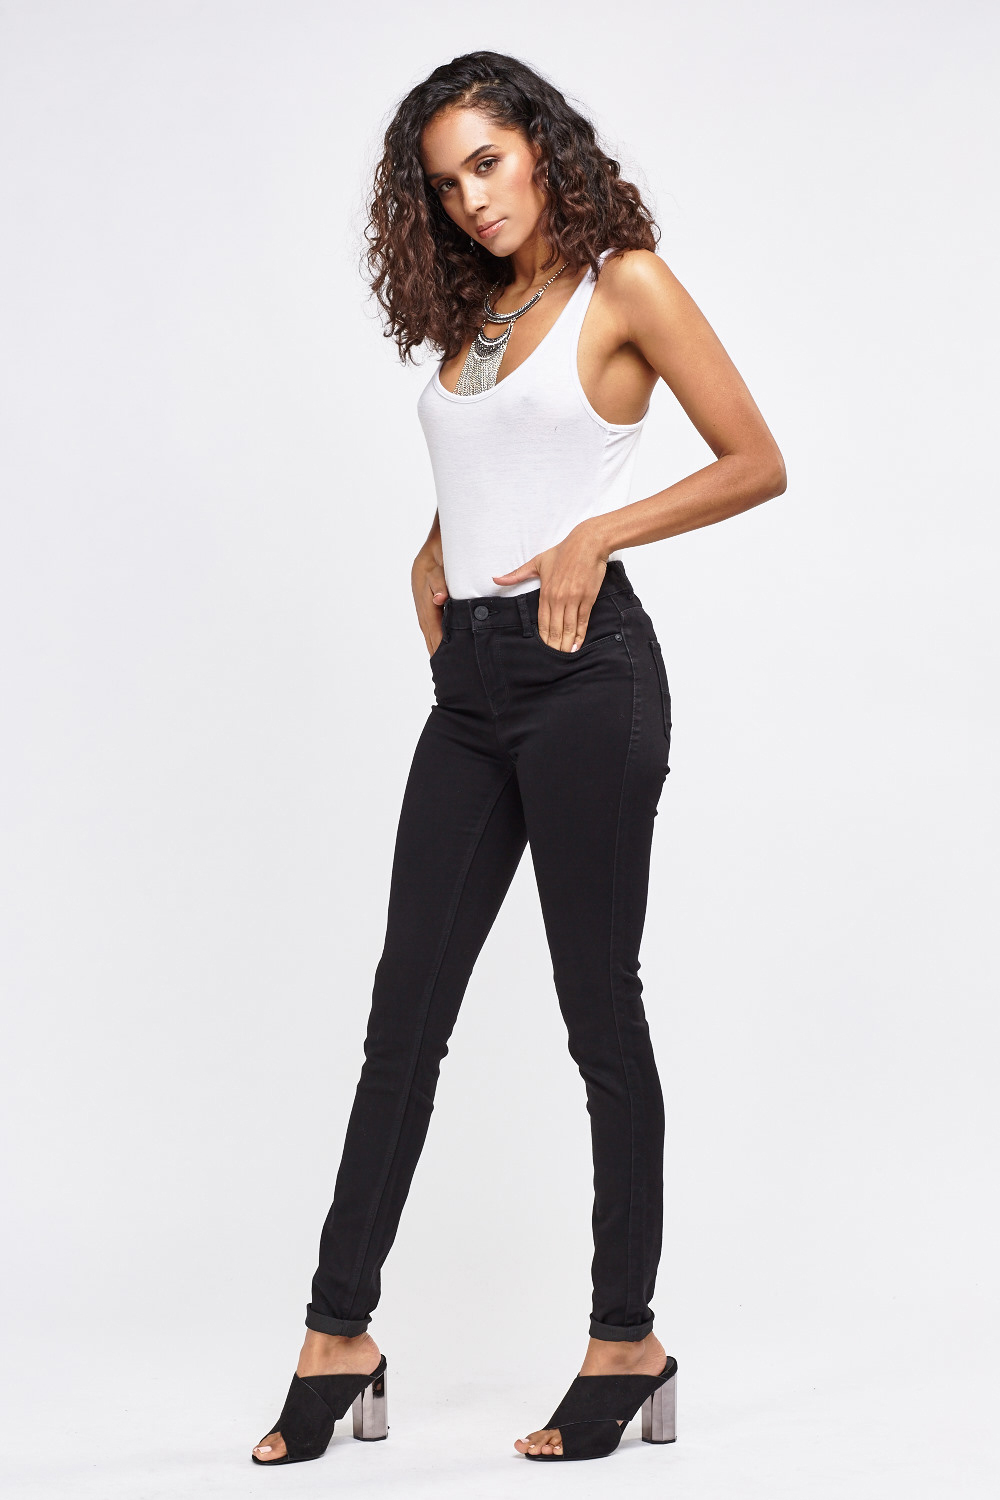 Low Rise Black Skinny Jeans - Just $7